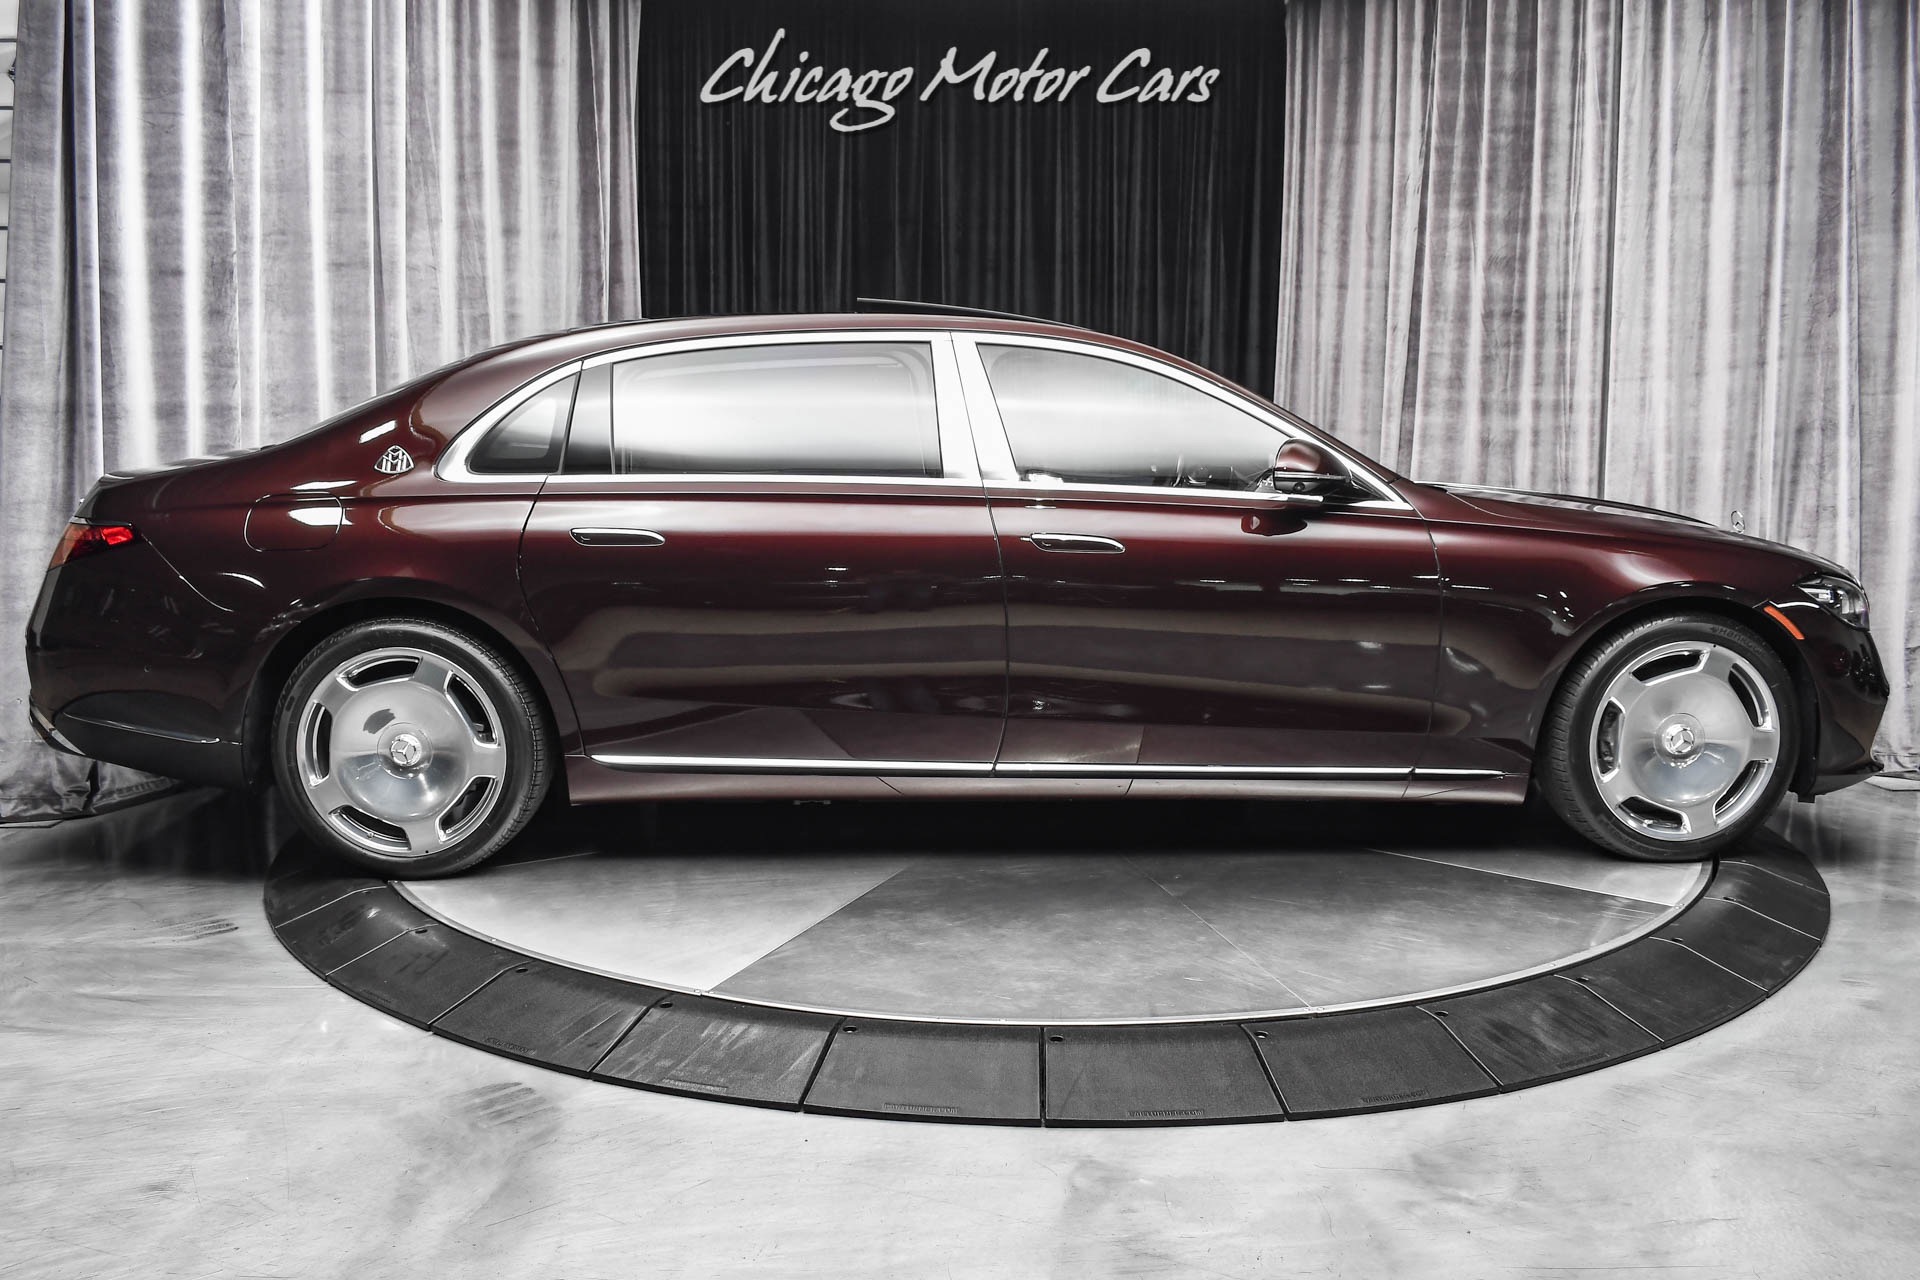 Used-2022-Mercedes-Benz-S580-Maybach-4Matic-Sedan-ONLY-500-Miles-Flowing-Lines-Trim-Gorgeous-Color-Combo